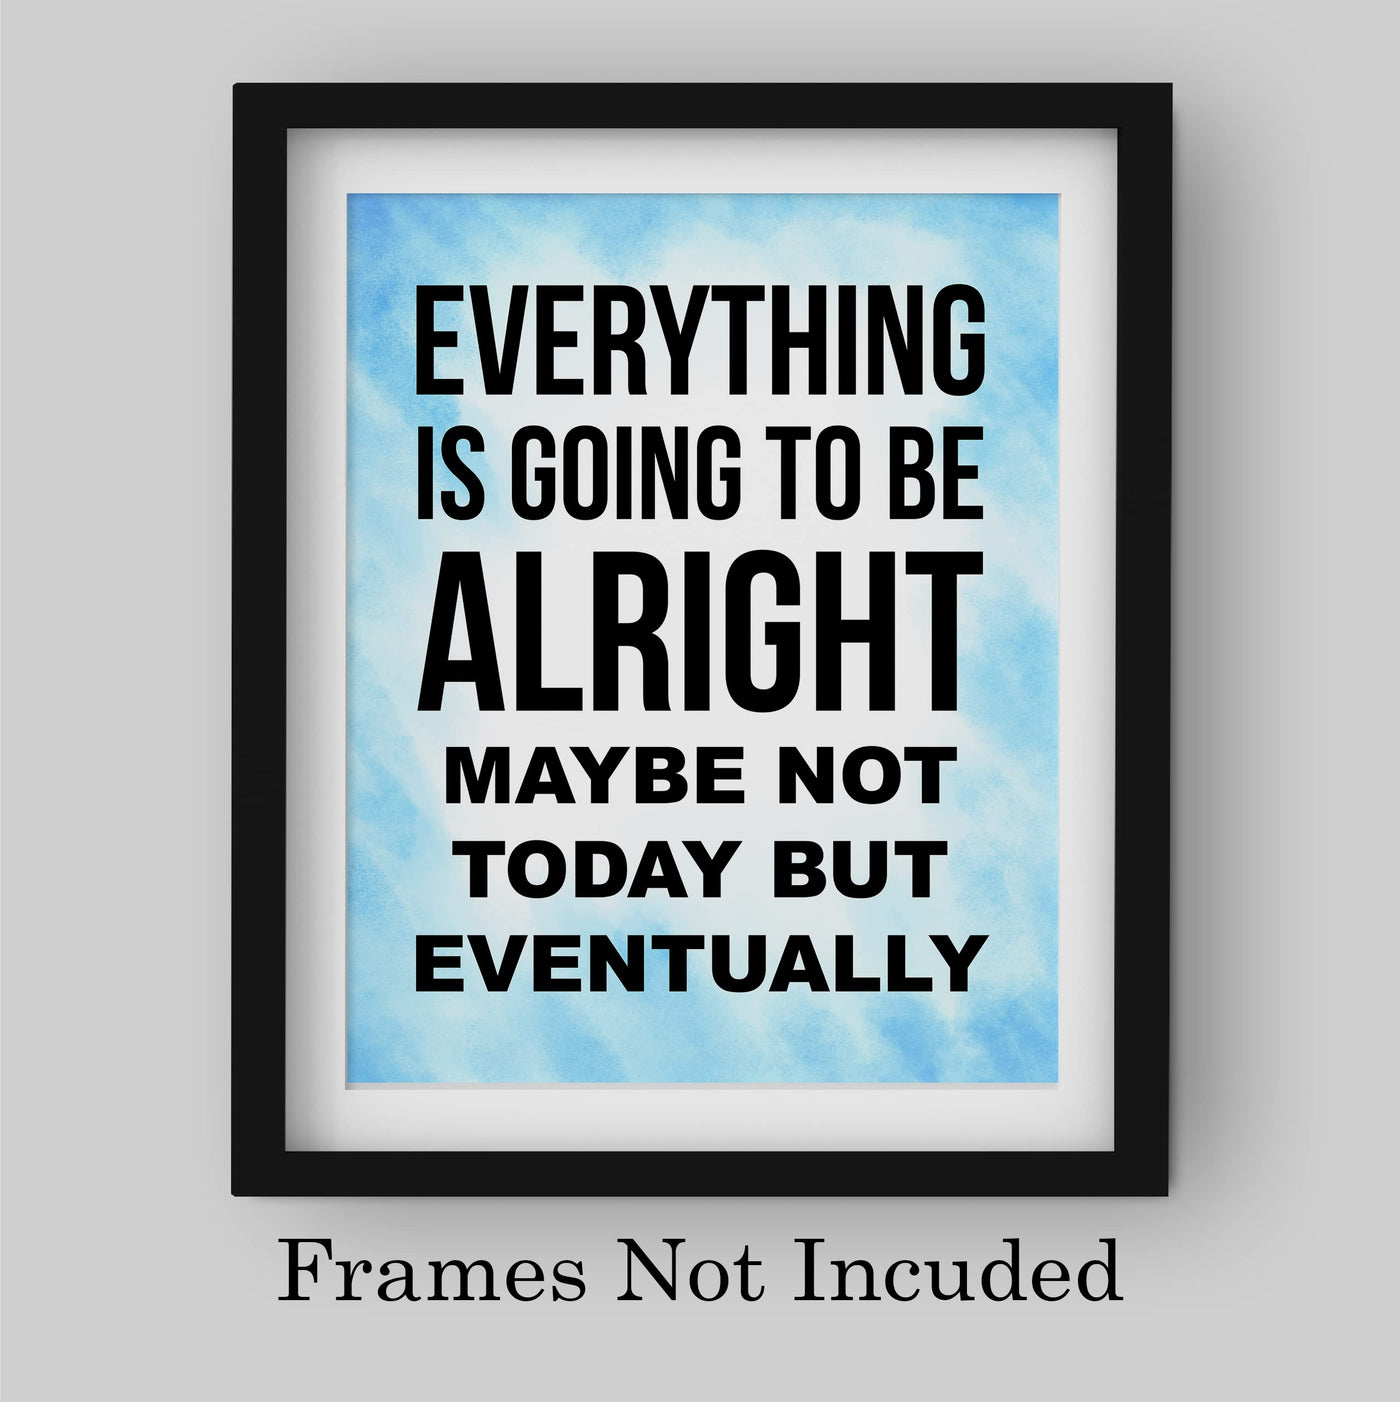 Everything Is Going to Be Alright Inspirational Quotes Wall Art -8 x 10" Motivational Typography Print -Ready to Frame. Positive Decoration for Home-Office-School Decor. Great Gift and Reminder!